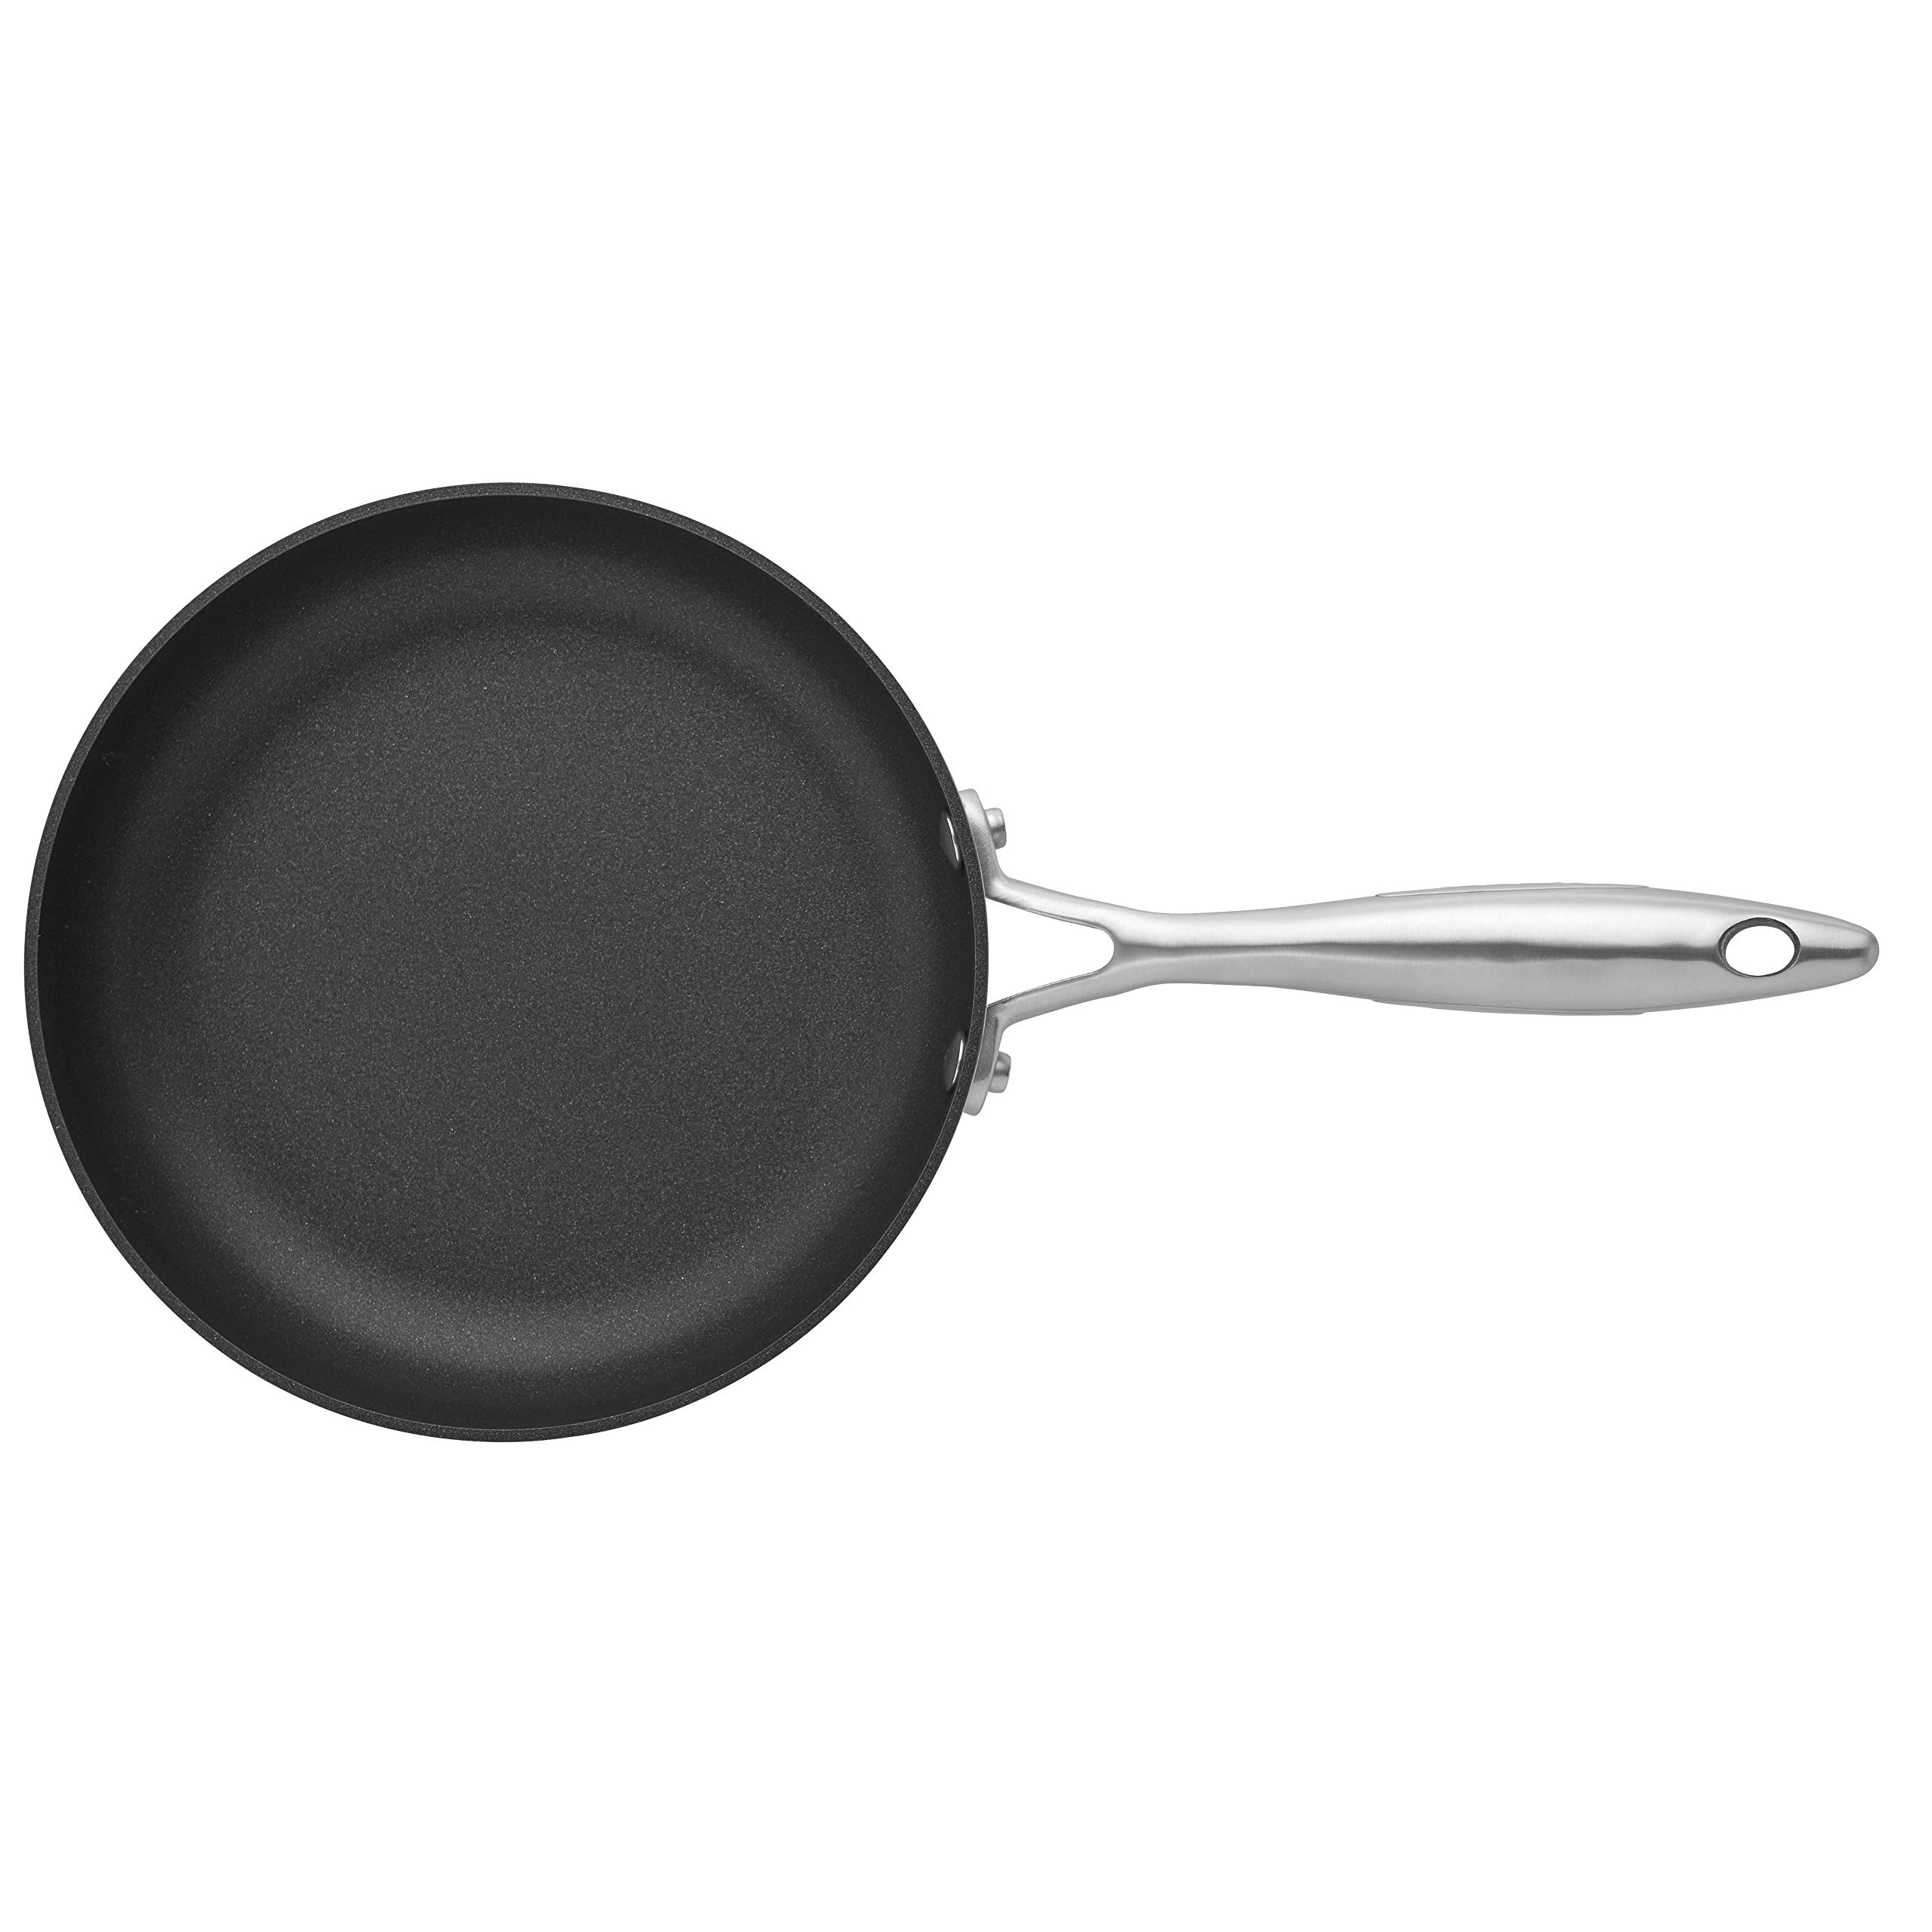 ScanPan CTX Stainless Steel-Aluminum 8 and 10.25 Inch 2-Piece Fry Pan Set - 65202600